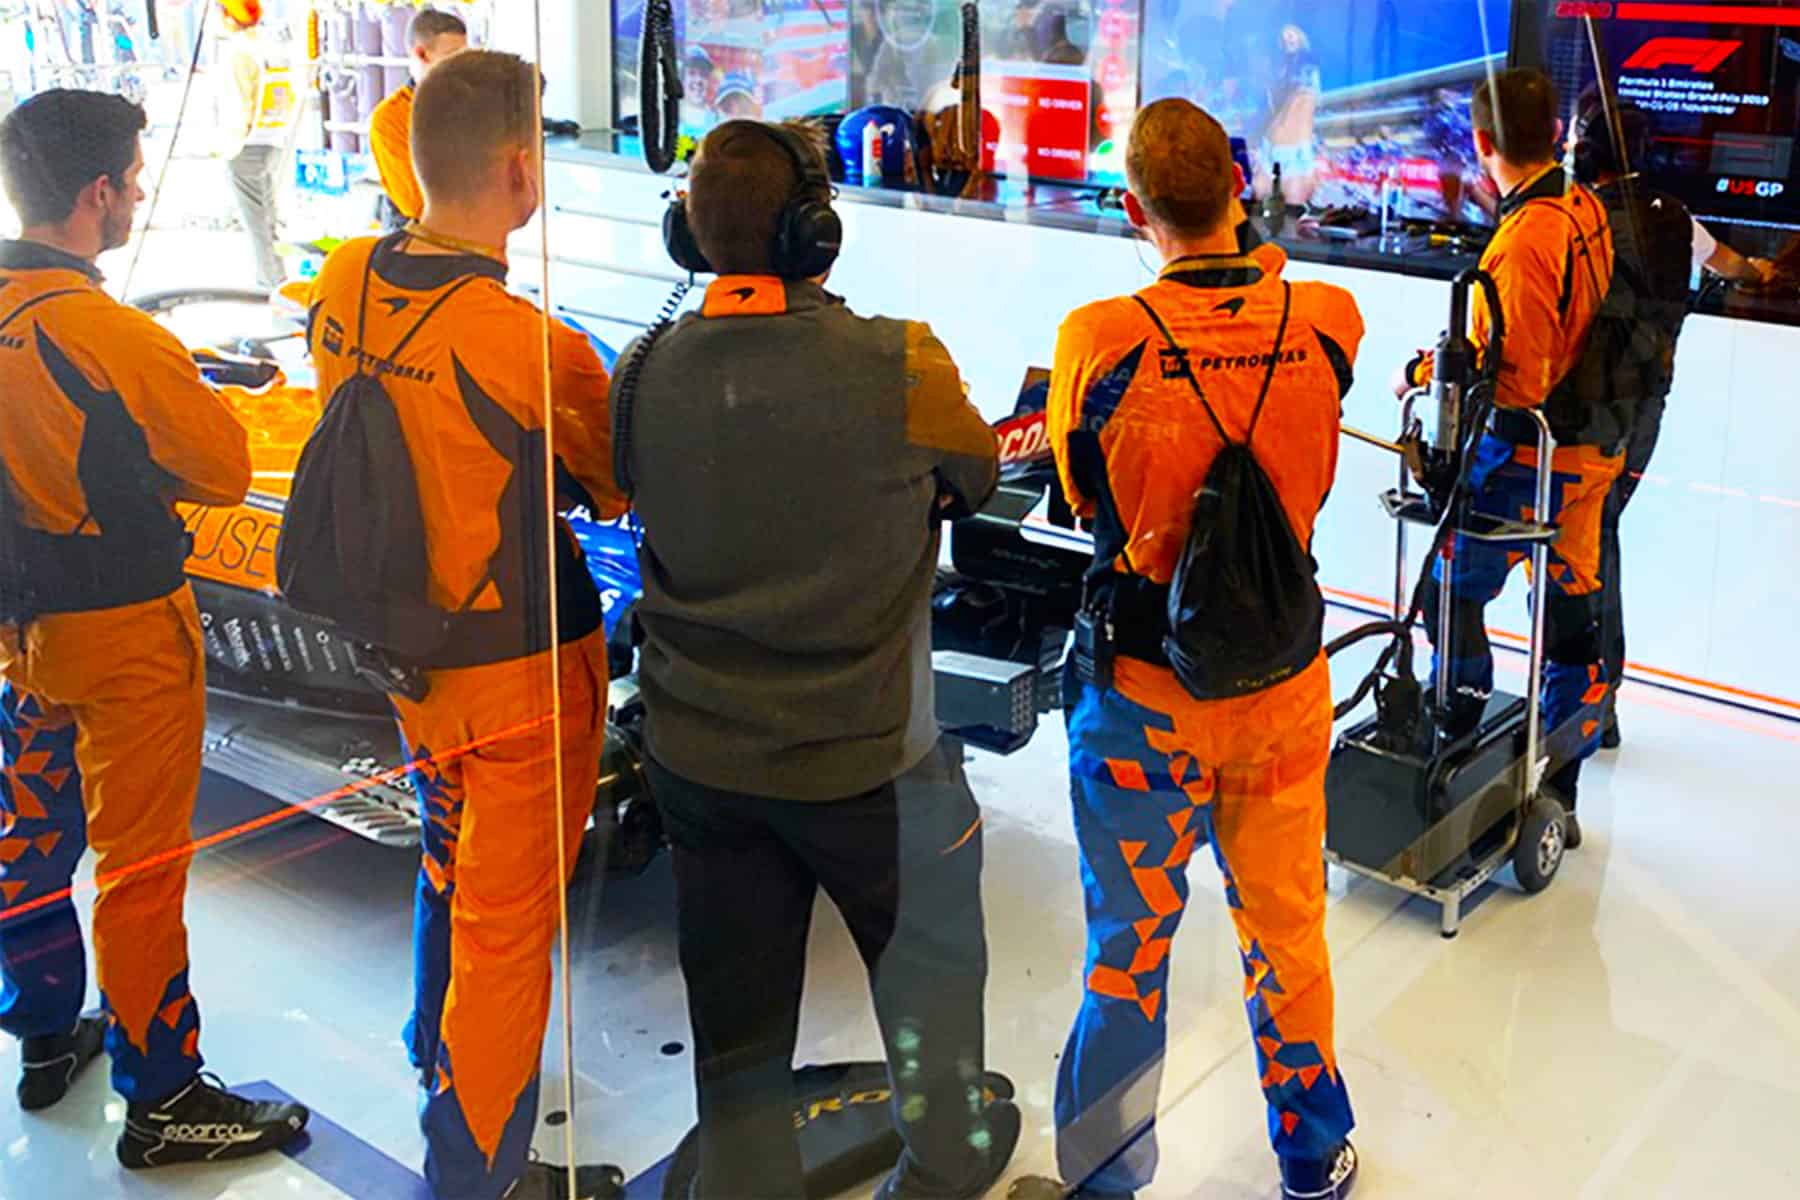 The McLaren garage crew takes a short break from race prep to check out the cheerleaders on screen.